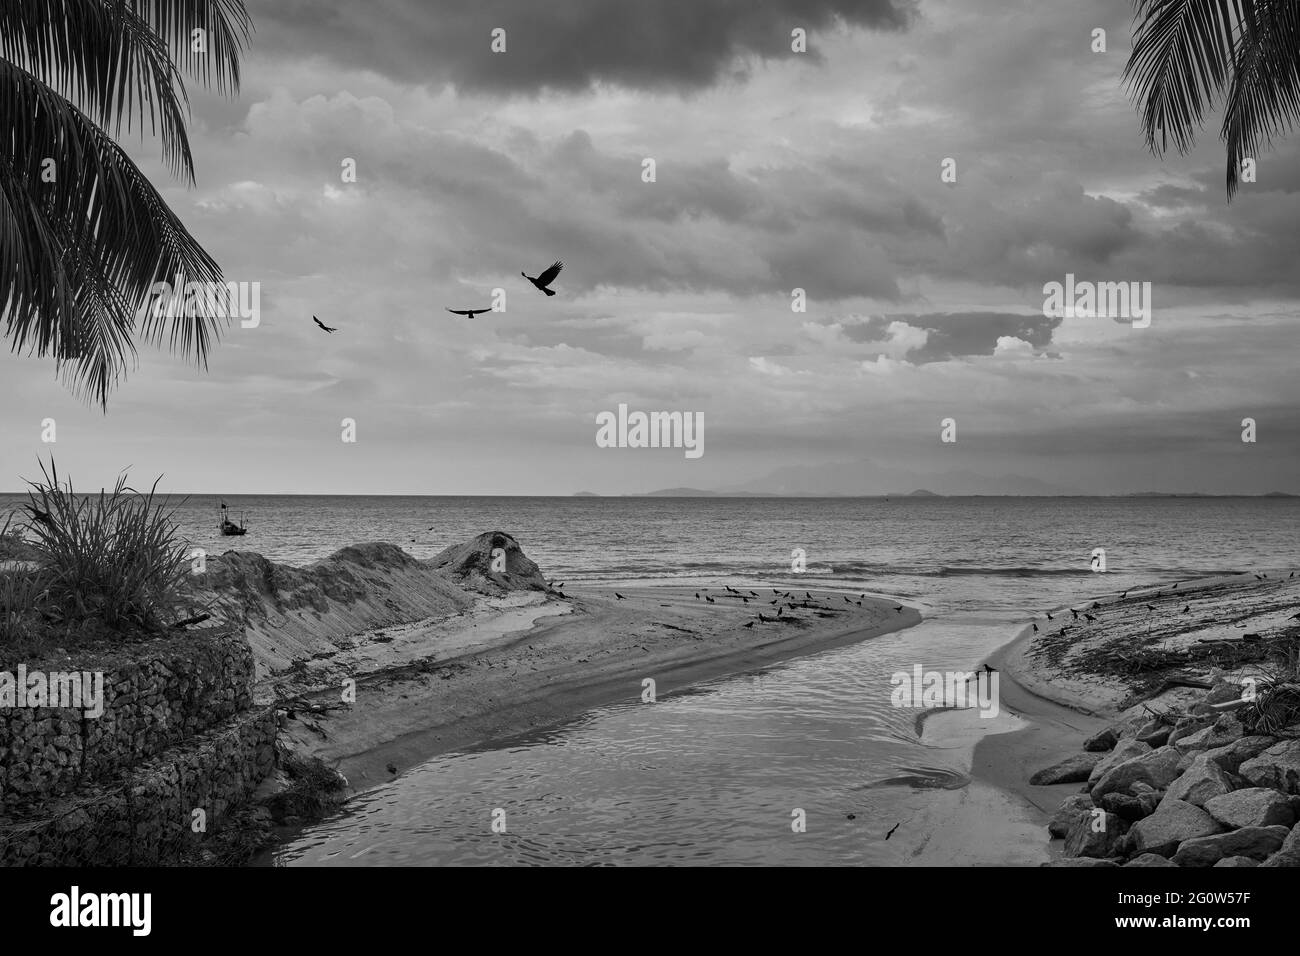 A small river flows into the sea with crows flying near the mouth on a moody evening in Penang, Malaysia, Asia Stock Photo